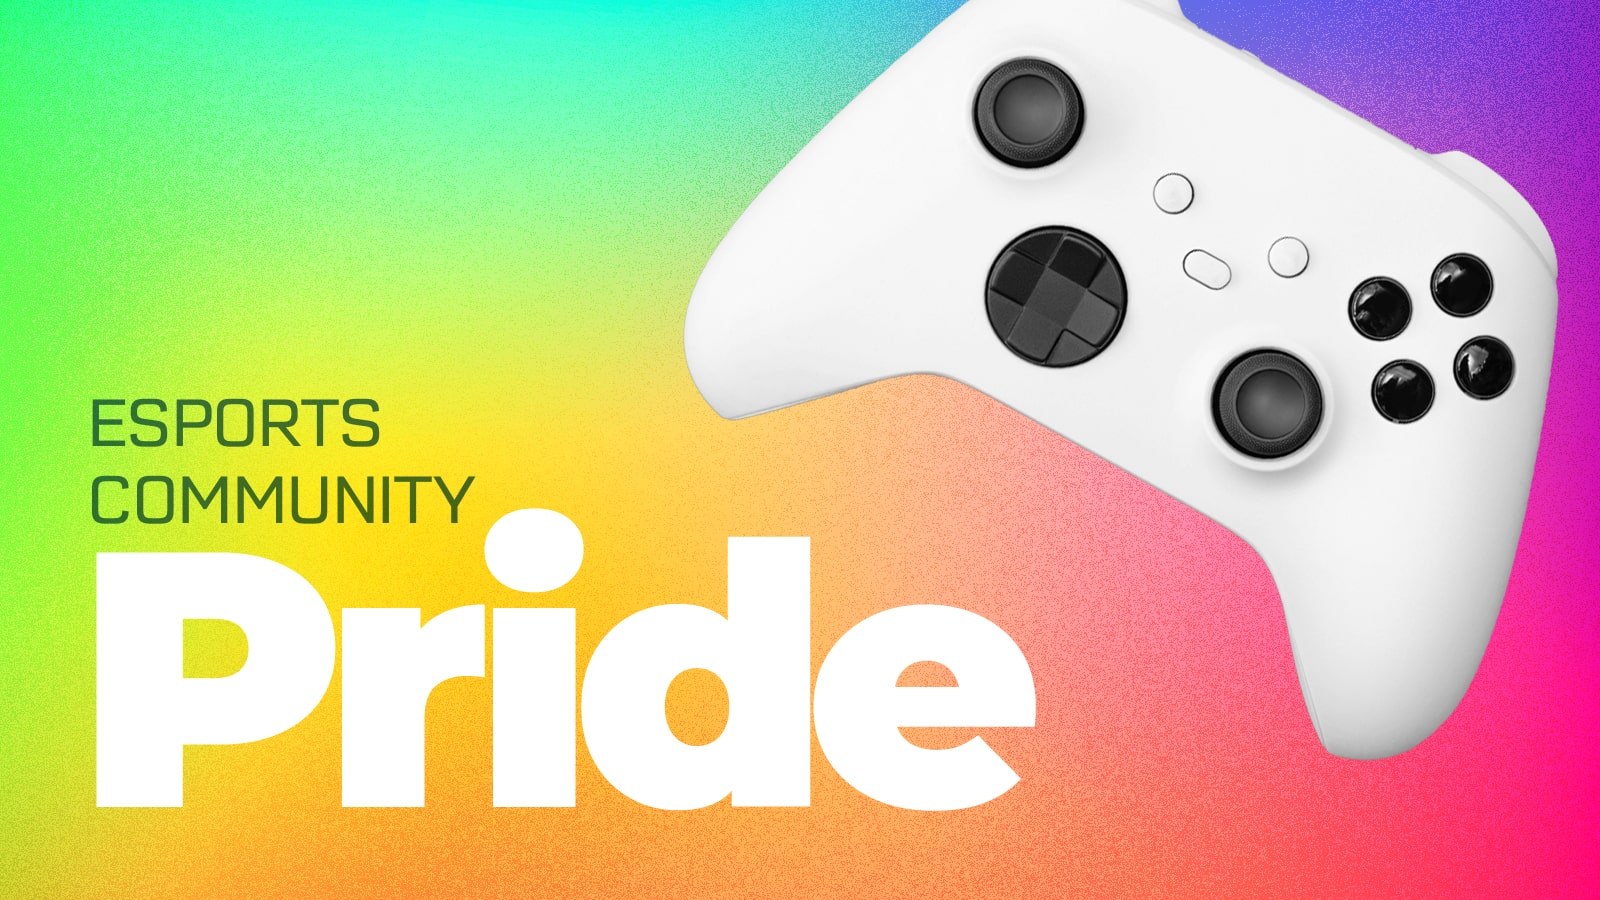 A white video game controller with black buttons against a rainbow gradient background with a grain texture featuring the words "Esports Community Pride" in the lower left-hand corner.